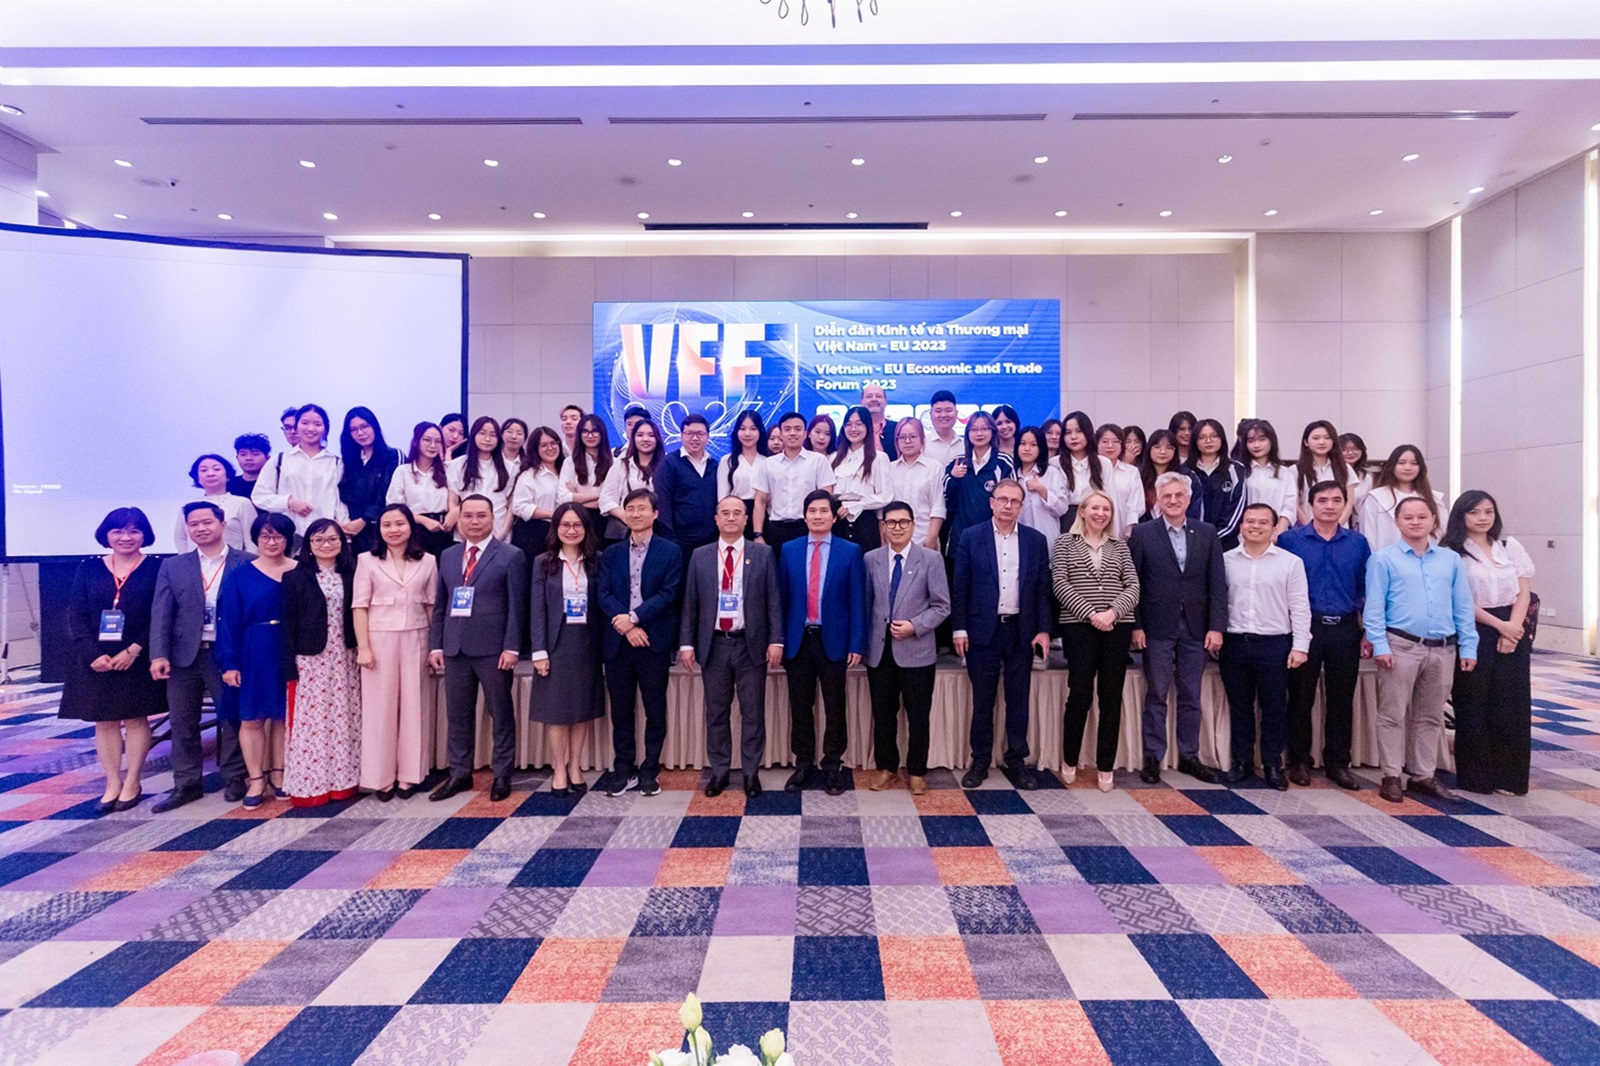 Vietnam-EU Economic and Trade Forum 2023: Towards Perfecting a Green Economy and Sustainable Development in Vietnam